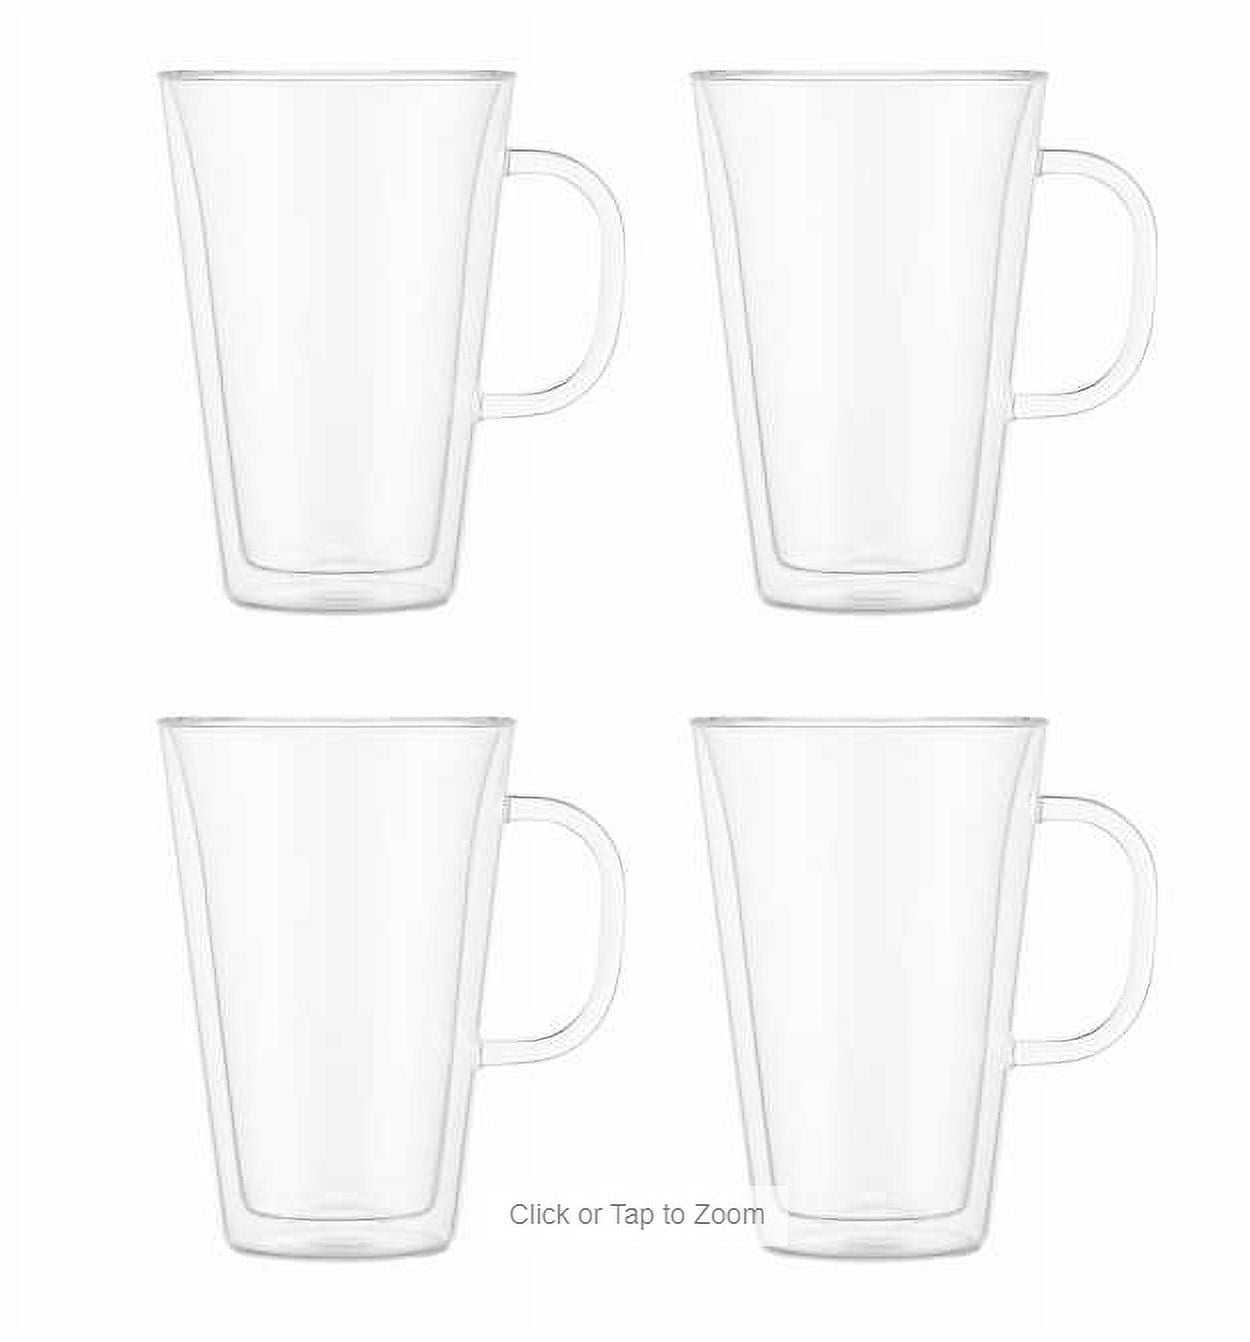 Double Wall Thermal Glass Mugs 13.5 oz Canteen by Bodum